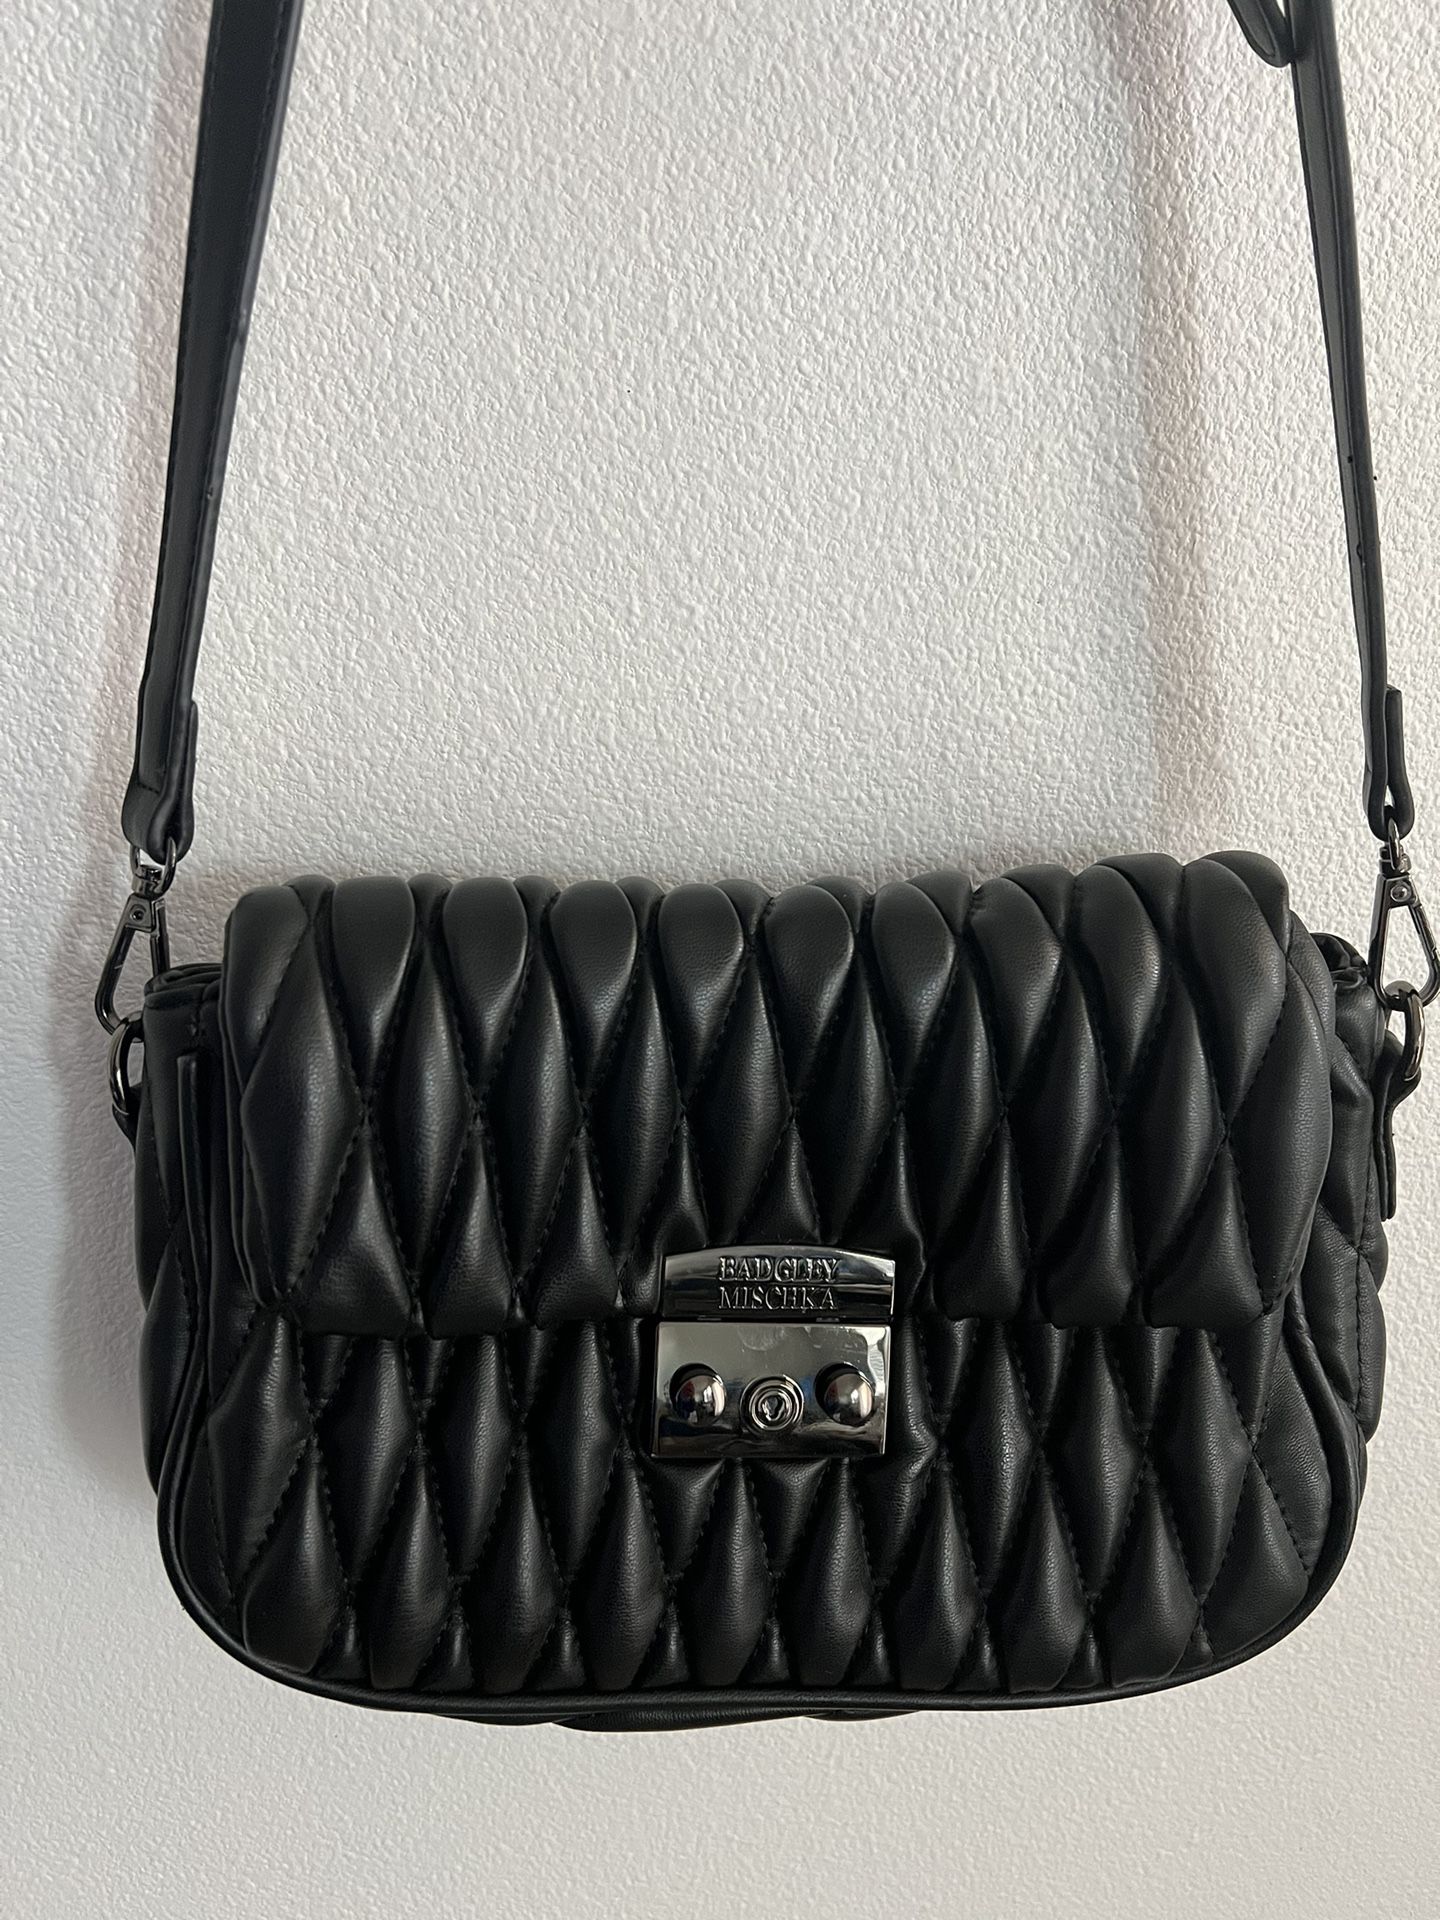 BADGLEY MISCHKA Black Quilted VEGAN Faux Leather Womens Crossbody Bag  